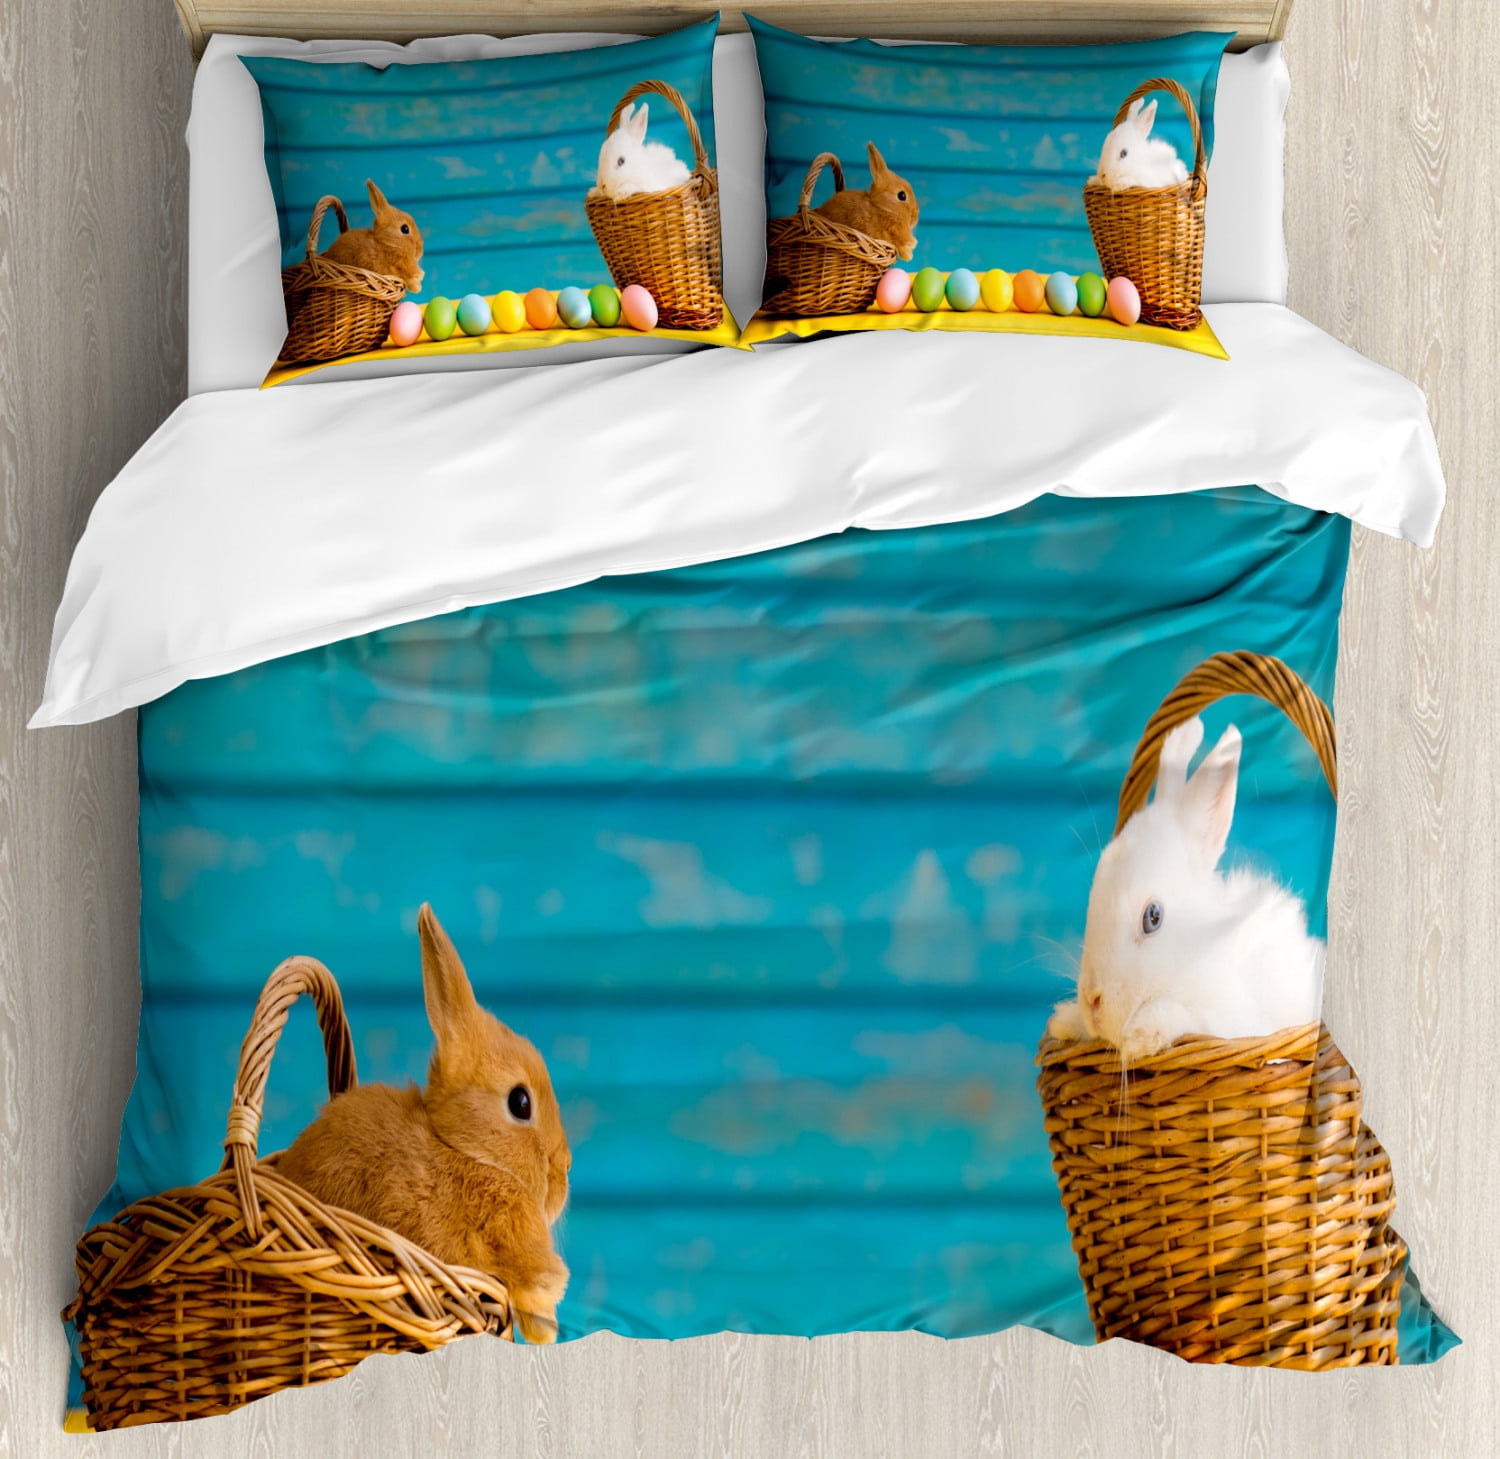 Easter Bunny Duvet Cover Set King Size, Two Cute Easter Rabbits with ...